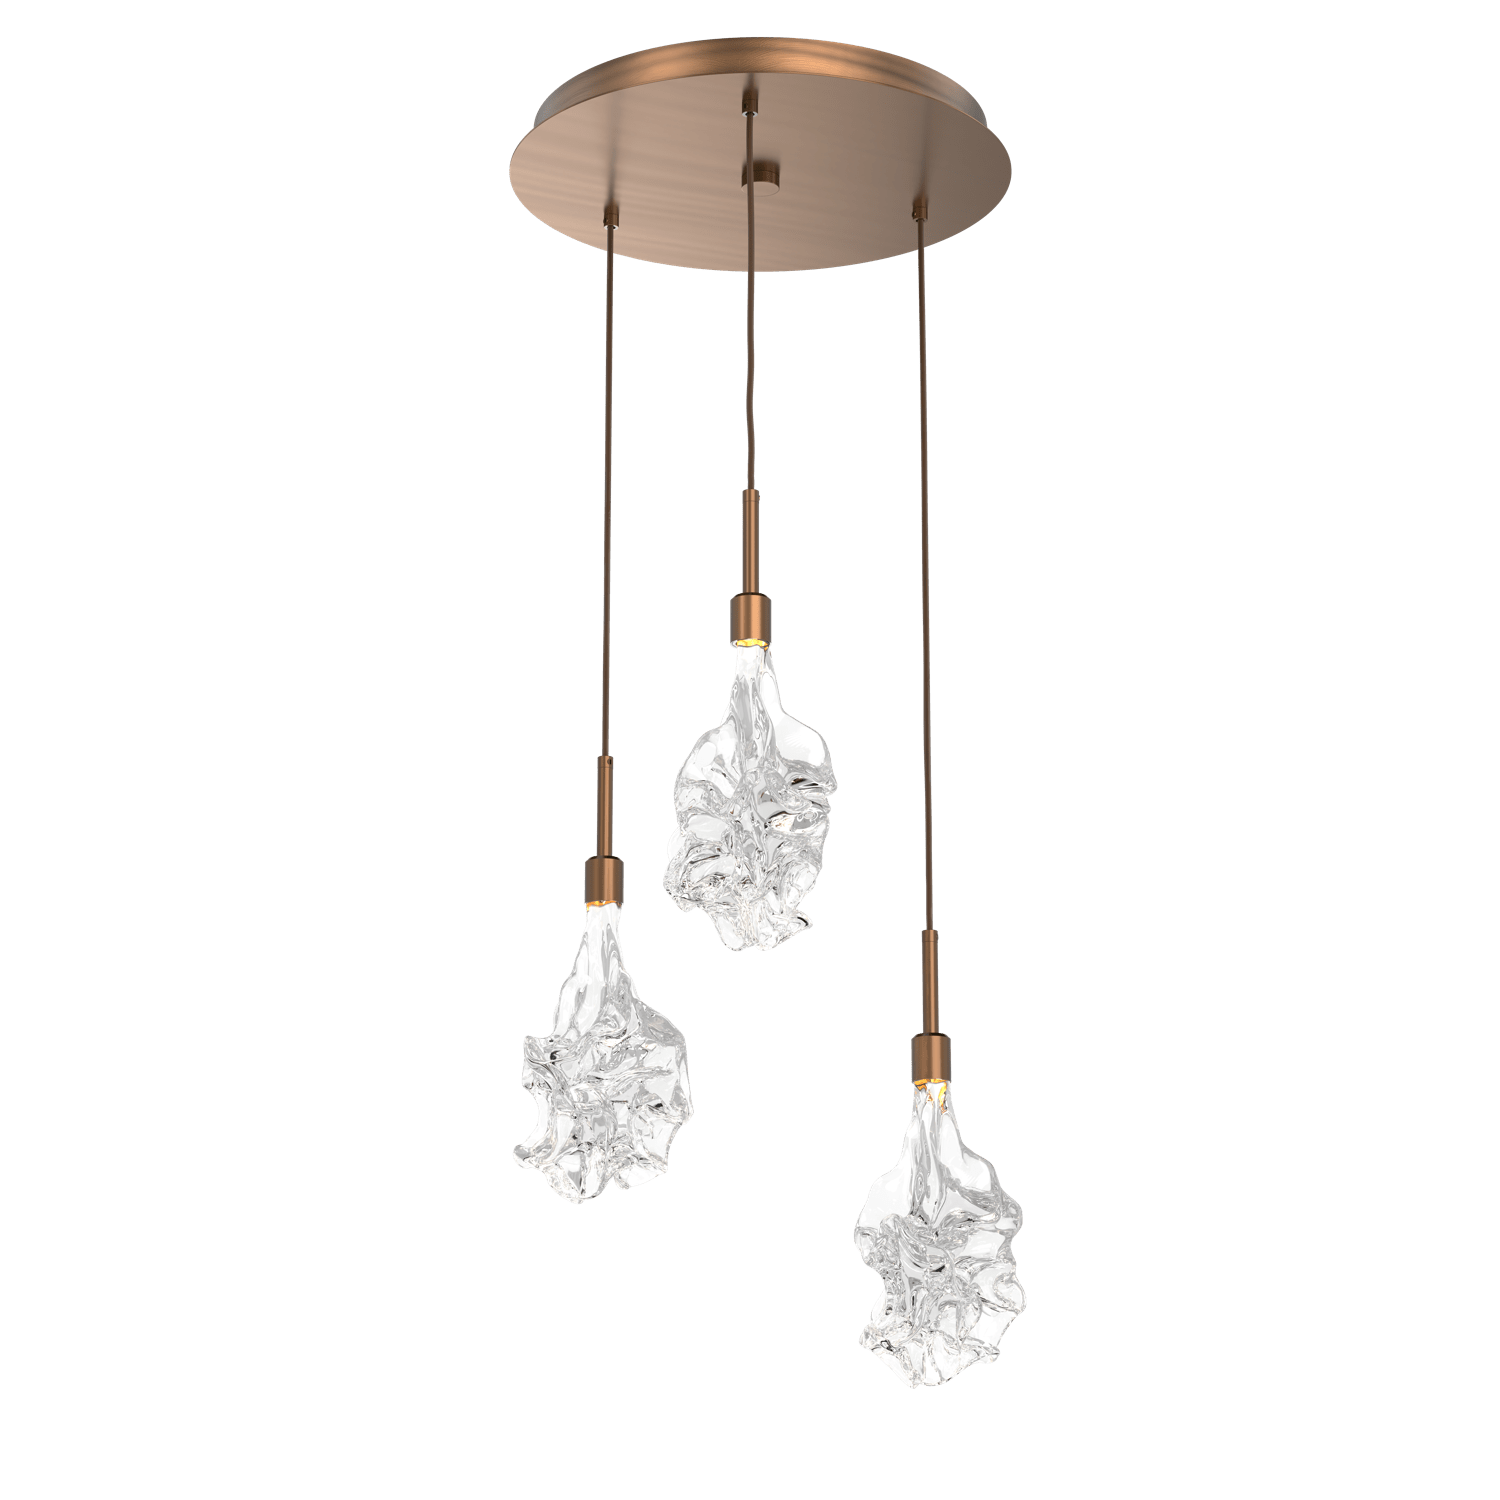 CHB0059-03-RB-Hammerton-Studio-Blossom-3-light-round-pendant-chandelier-with-oil-rubbed-bronze-finish-and-clear-handblown-crystal-glass-shades-and-LED-lamping